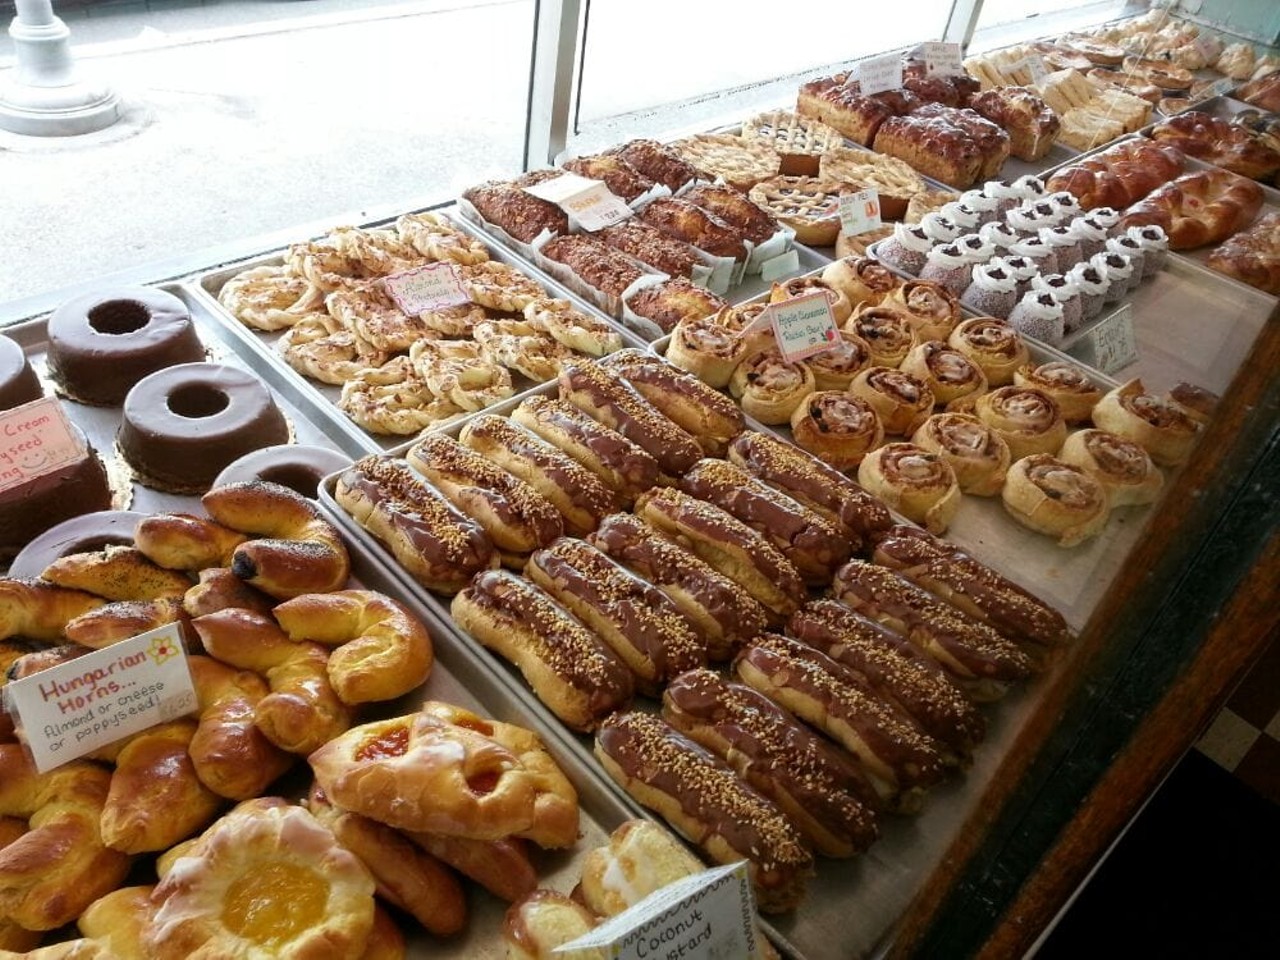 New Palace Bakery
9833 Joseph Campau Ave., Hamtramck; 313-875-1334
Family owned and operated, New Palace Bakery specializes in Polish and European style baking. From cakes, to strudel, to paczki, New Palace Bakery has a little something for everyone.
Photo via Yelp User, Tamara Y.